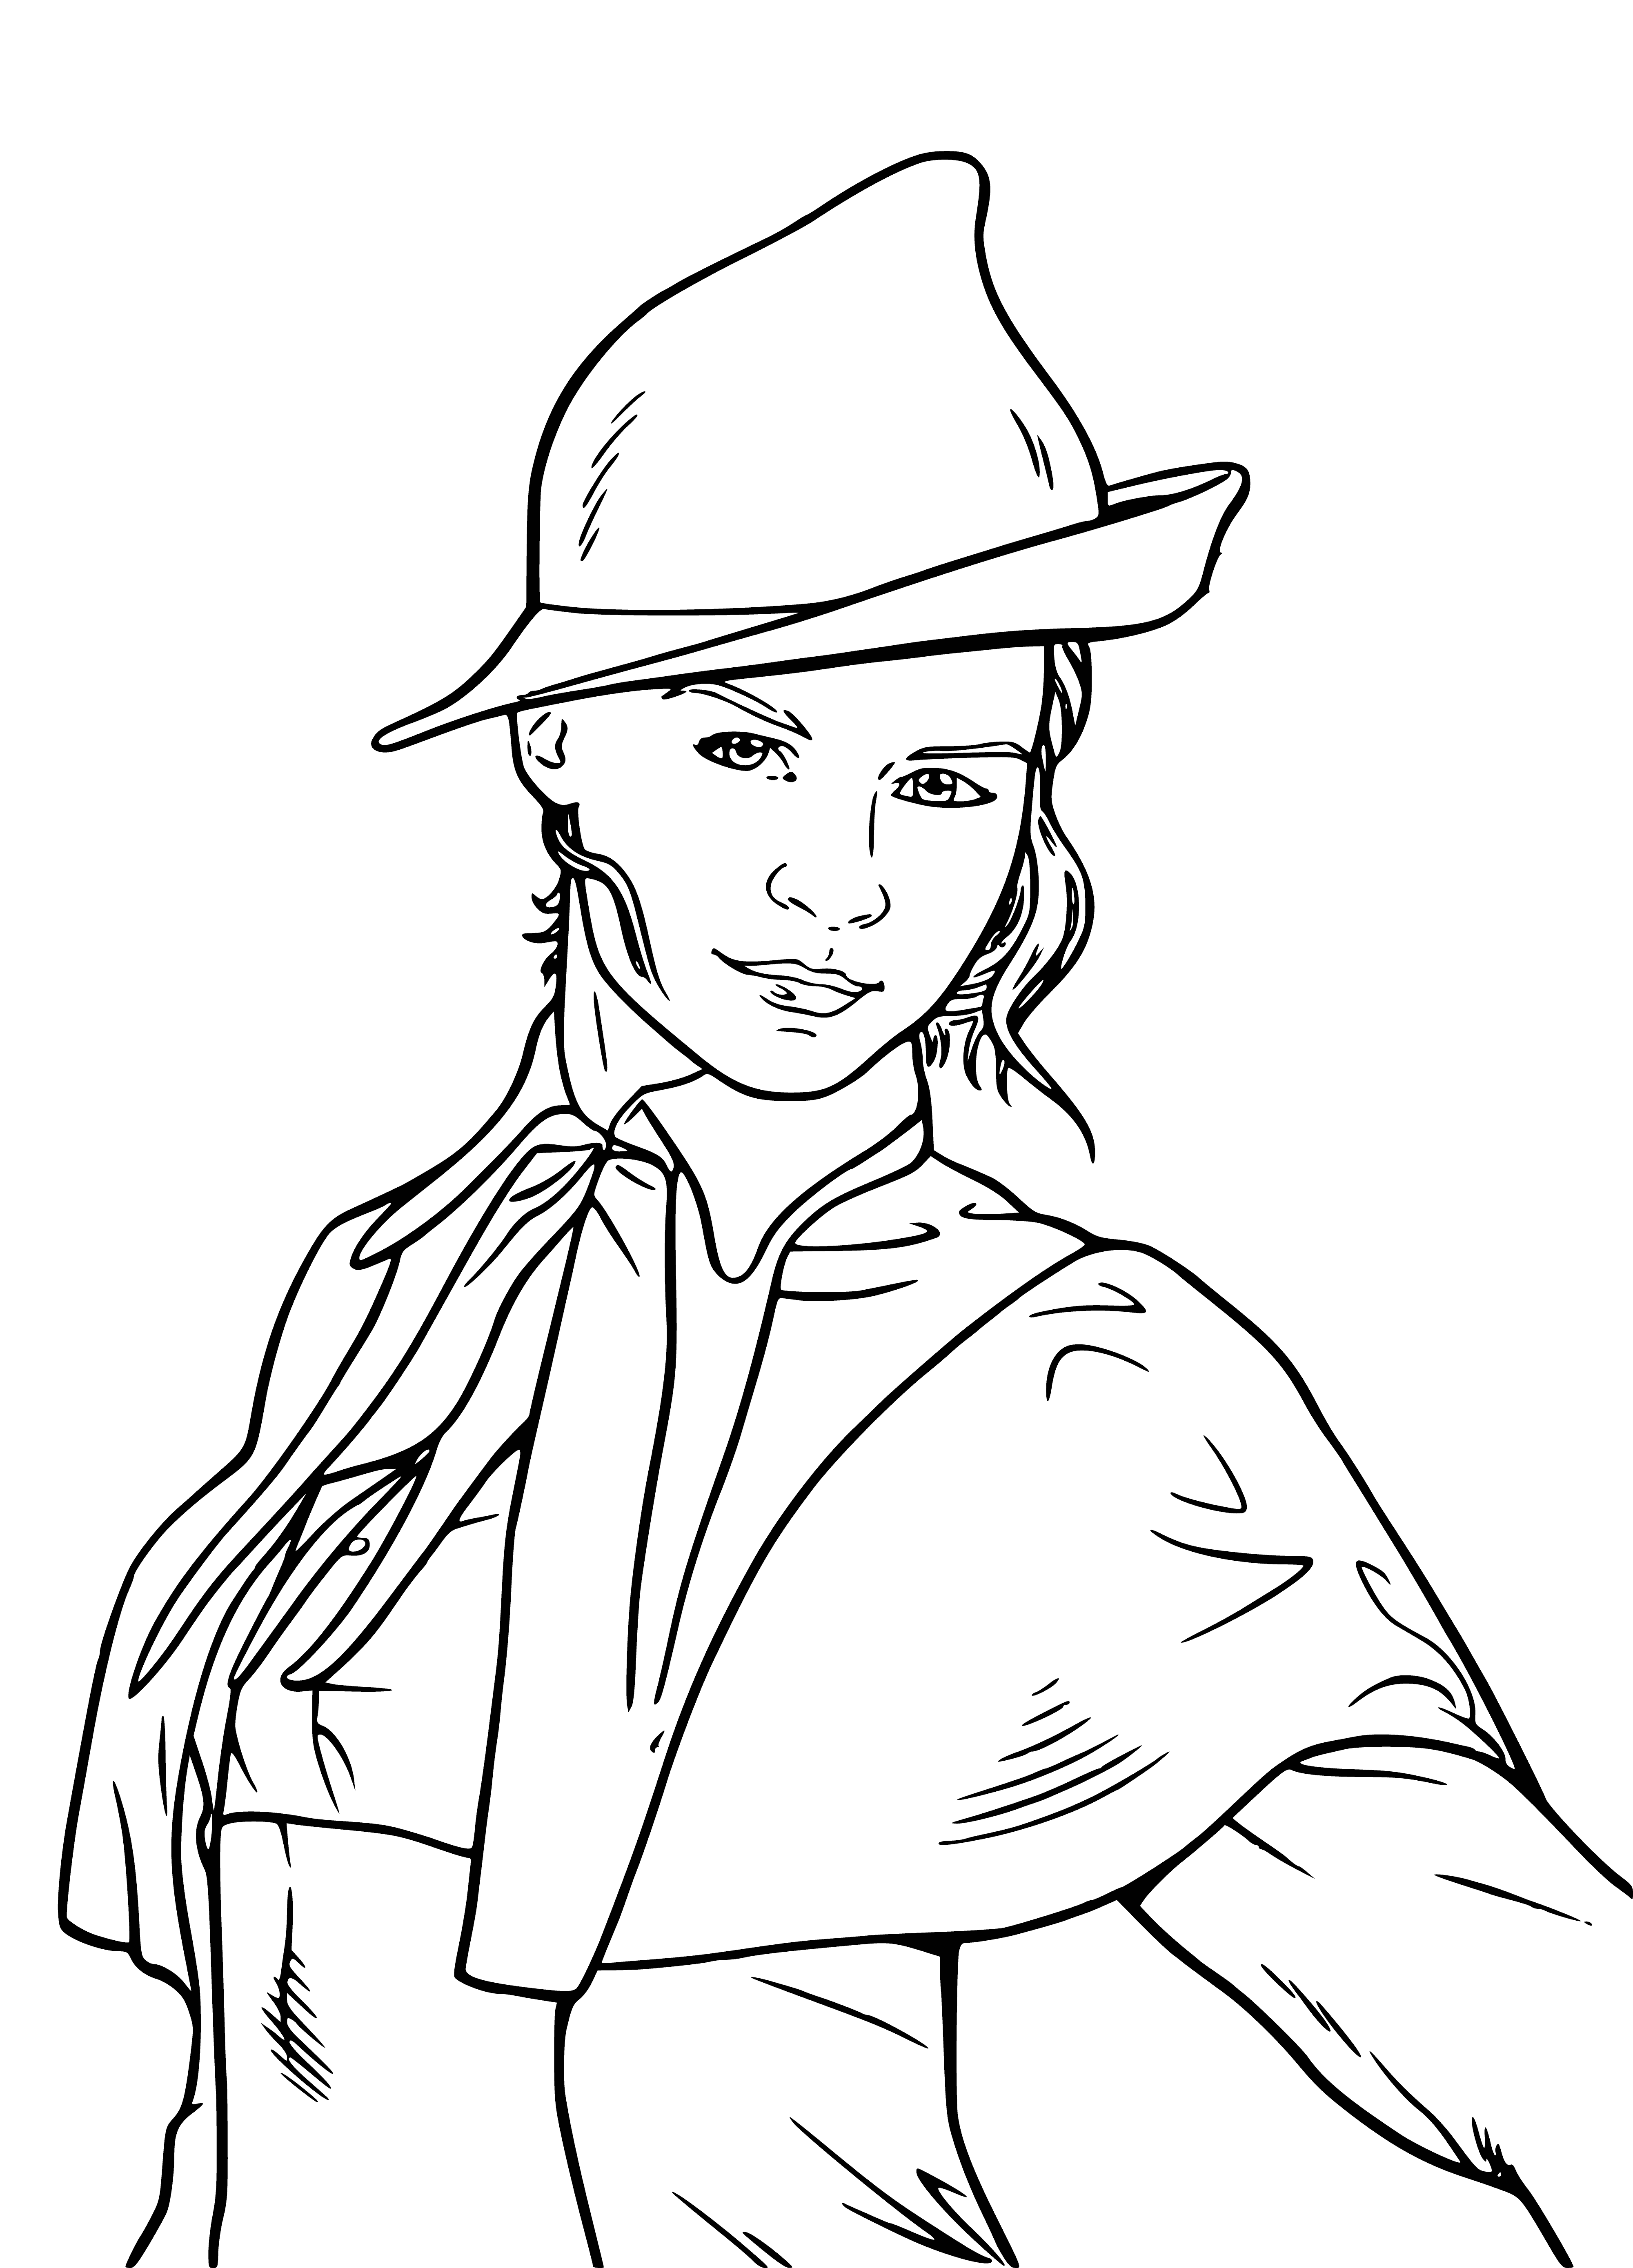 coloring page: Fleur Delacour is a stunning French student at Beauxbatons Academy who has an aura of sophistication and mystery.